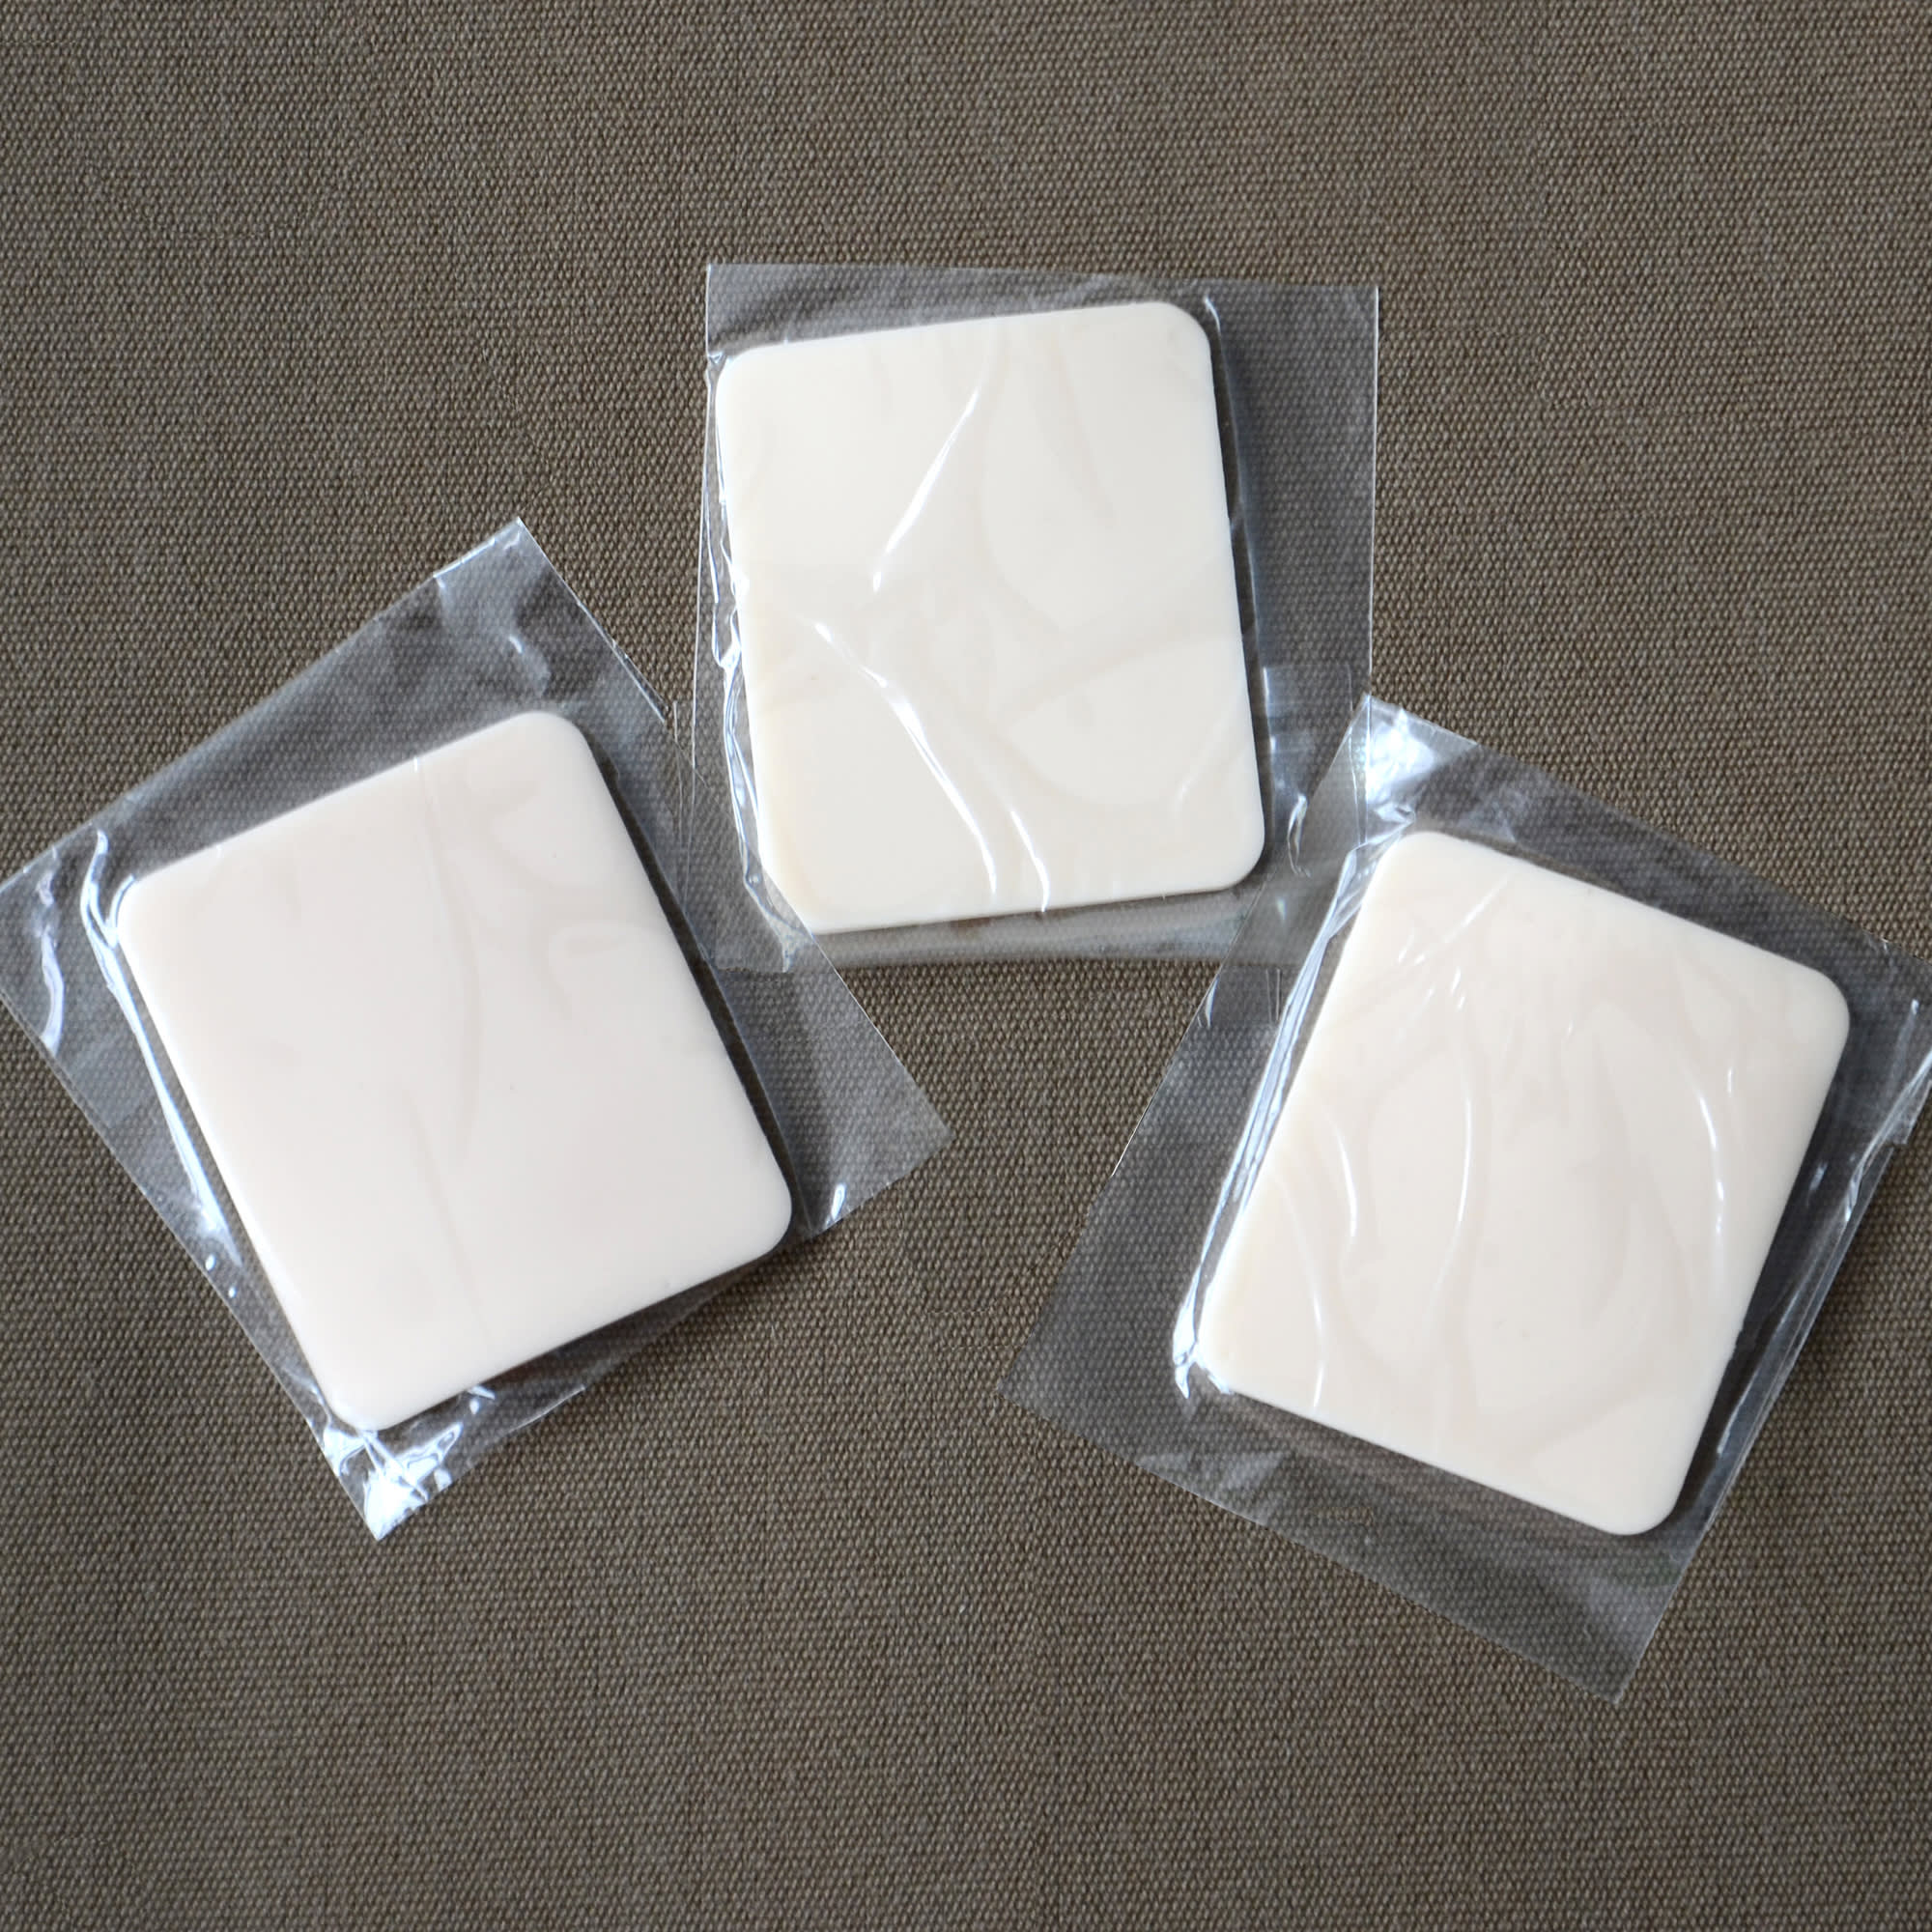 Blue Wave Infrared Sauna Oxygen Ionizer Fragrance Pad Replacement - 3 pack